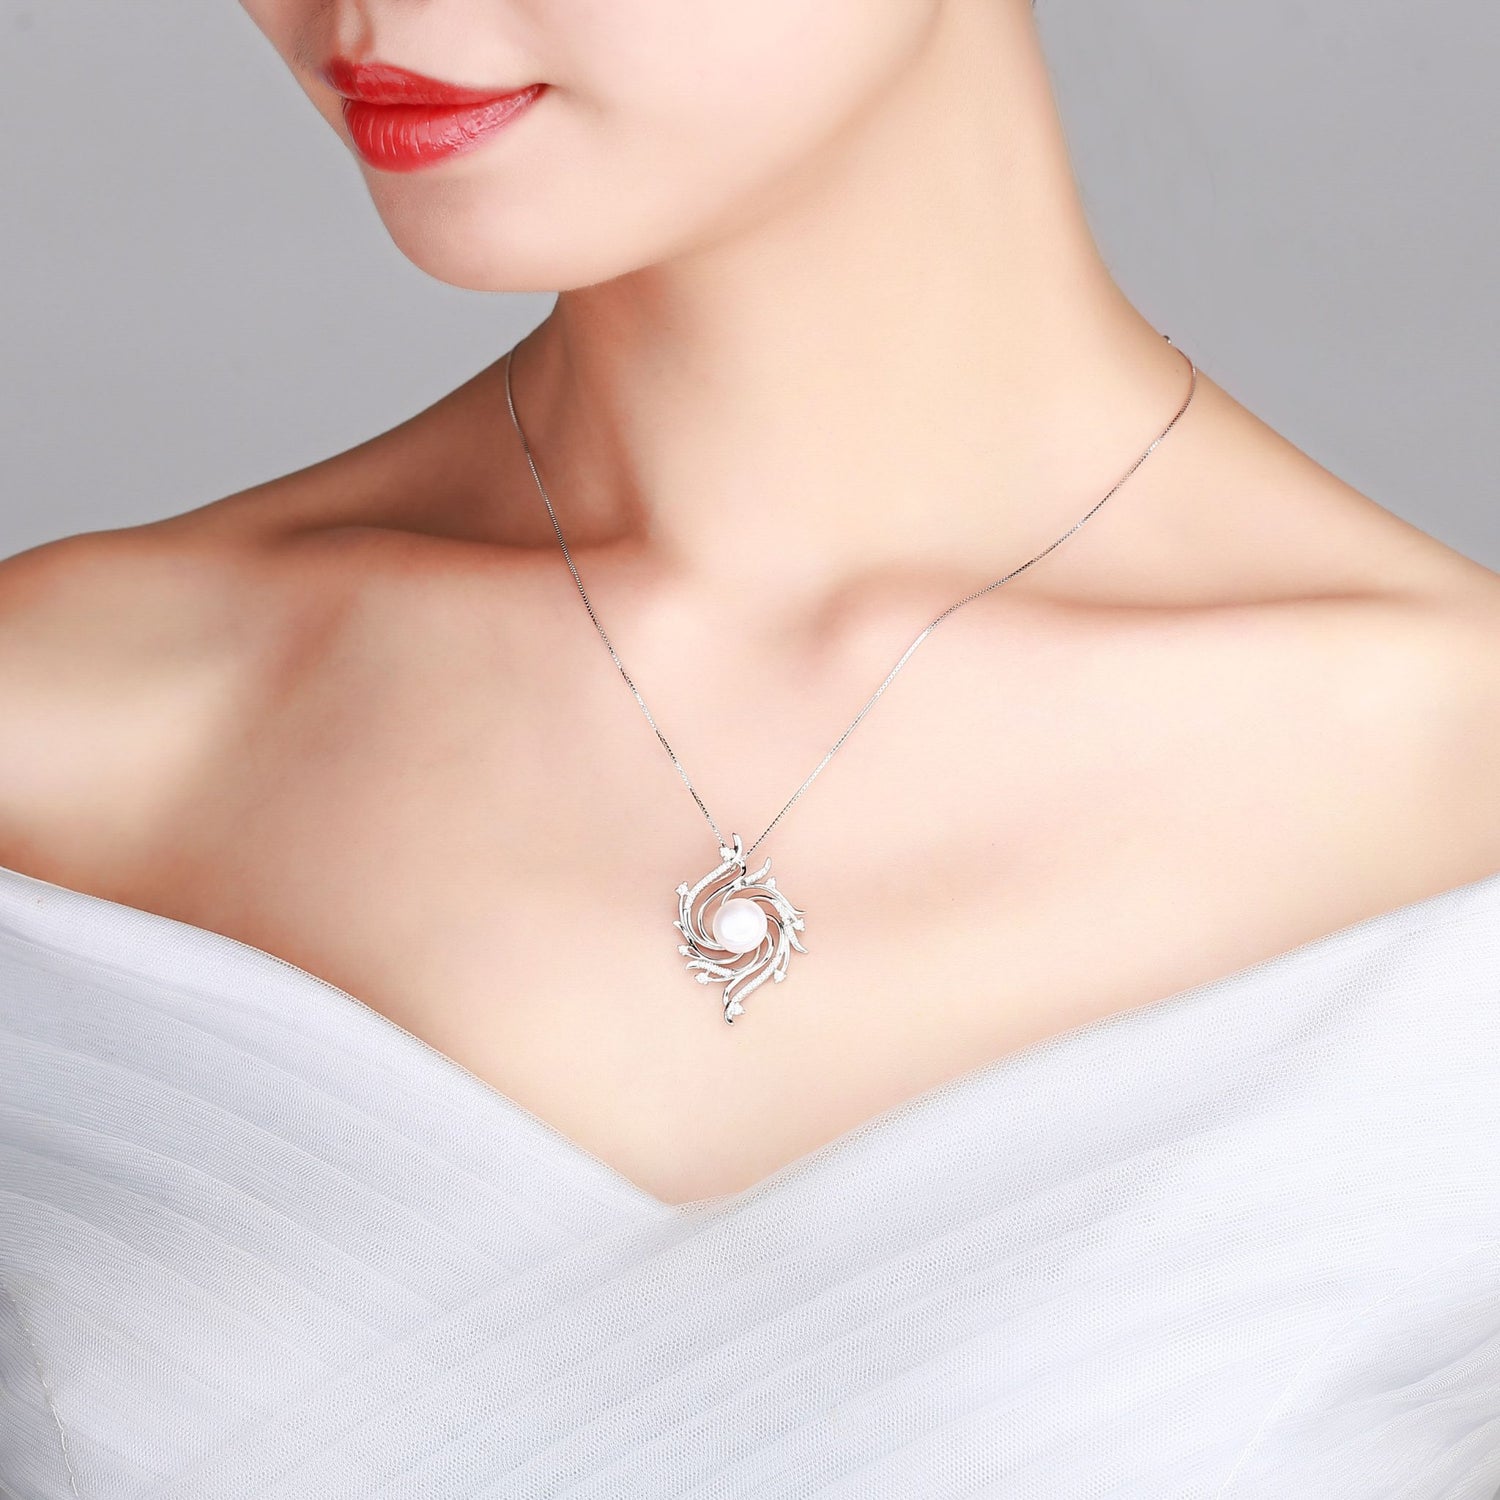 Sunburst Pearl Necklace - Timeless Pearl